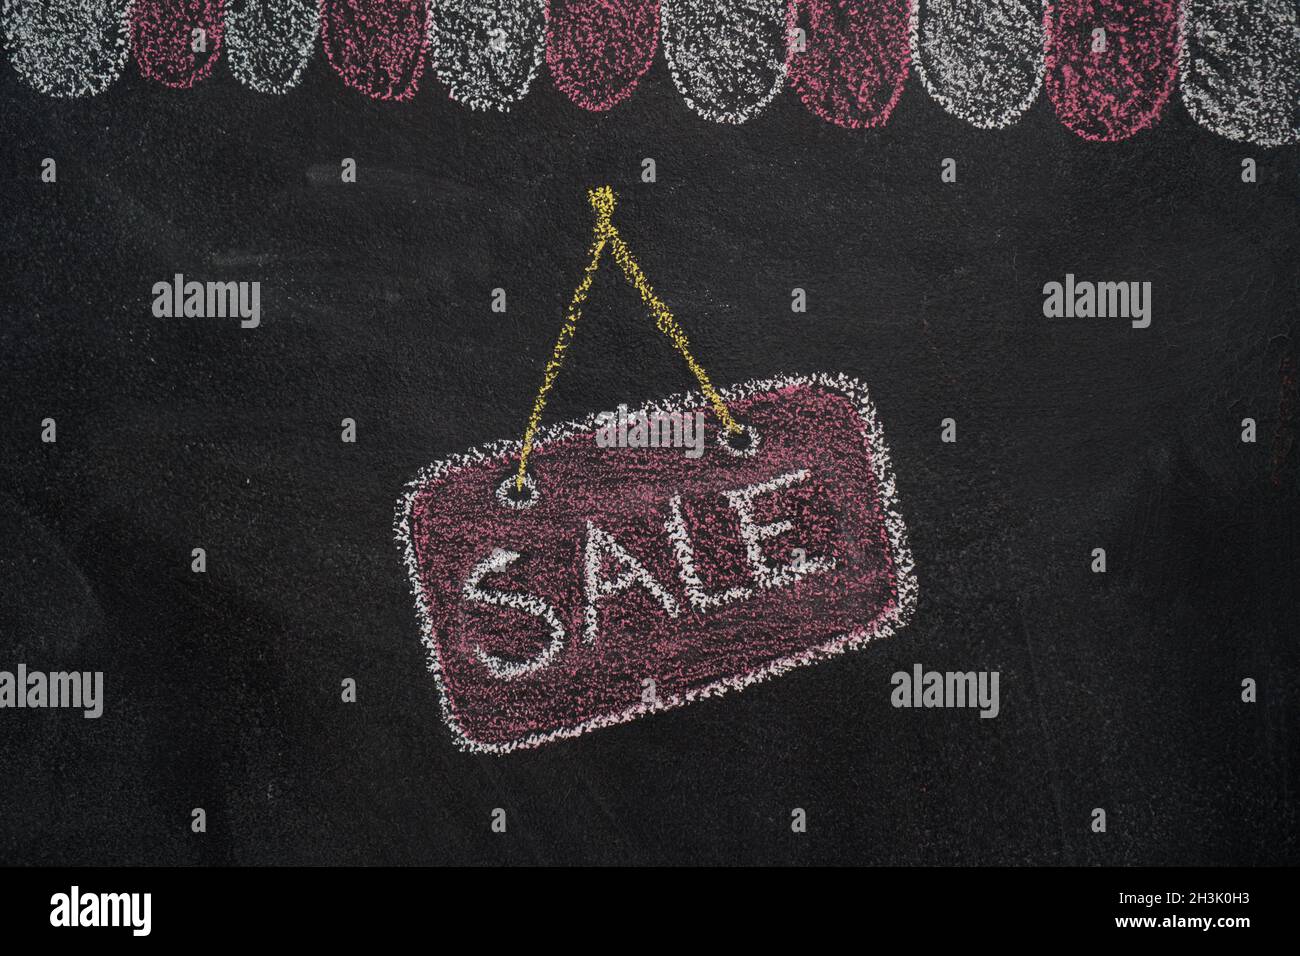 Shop cafe roof with sale sign on chalkboard Stock Photo